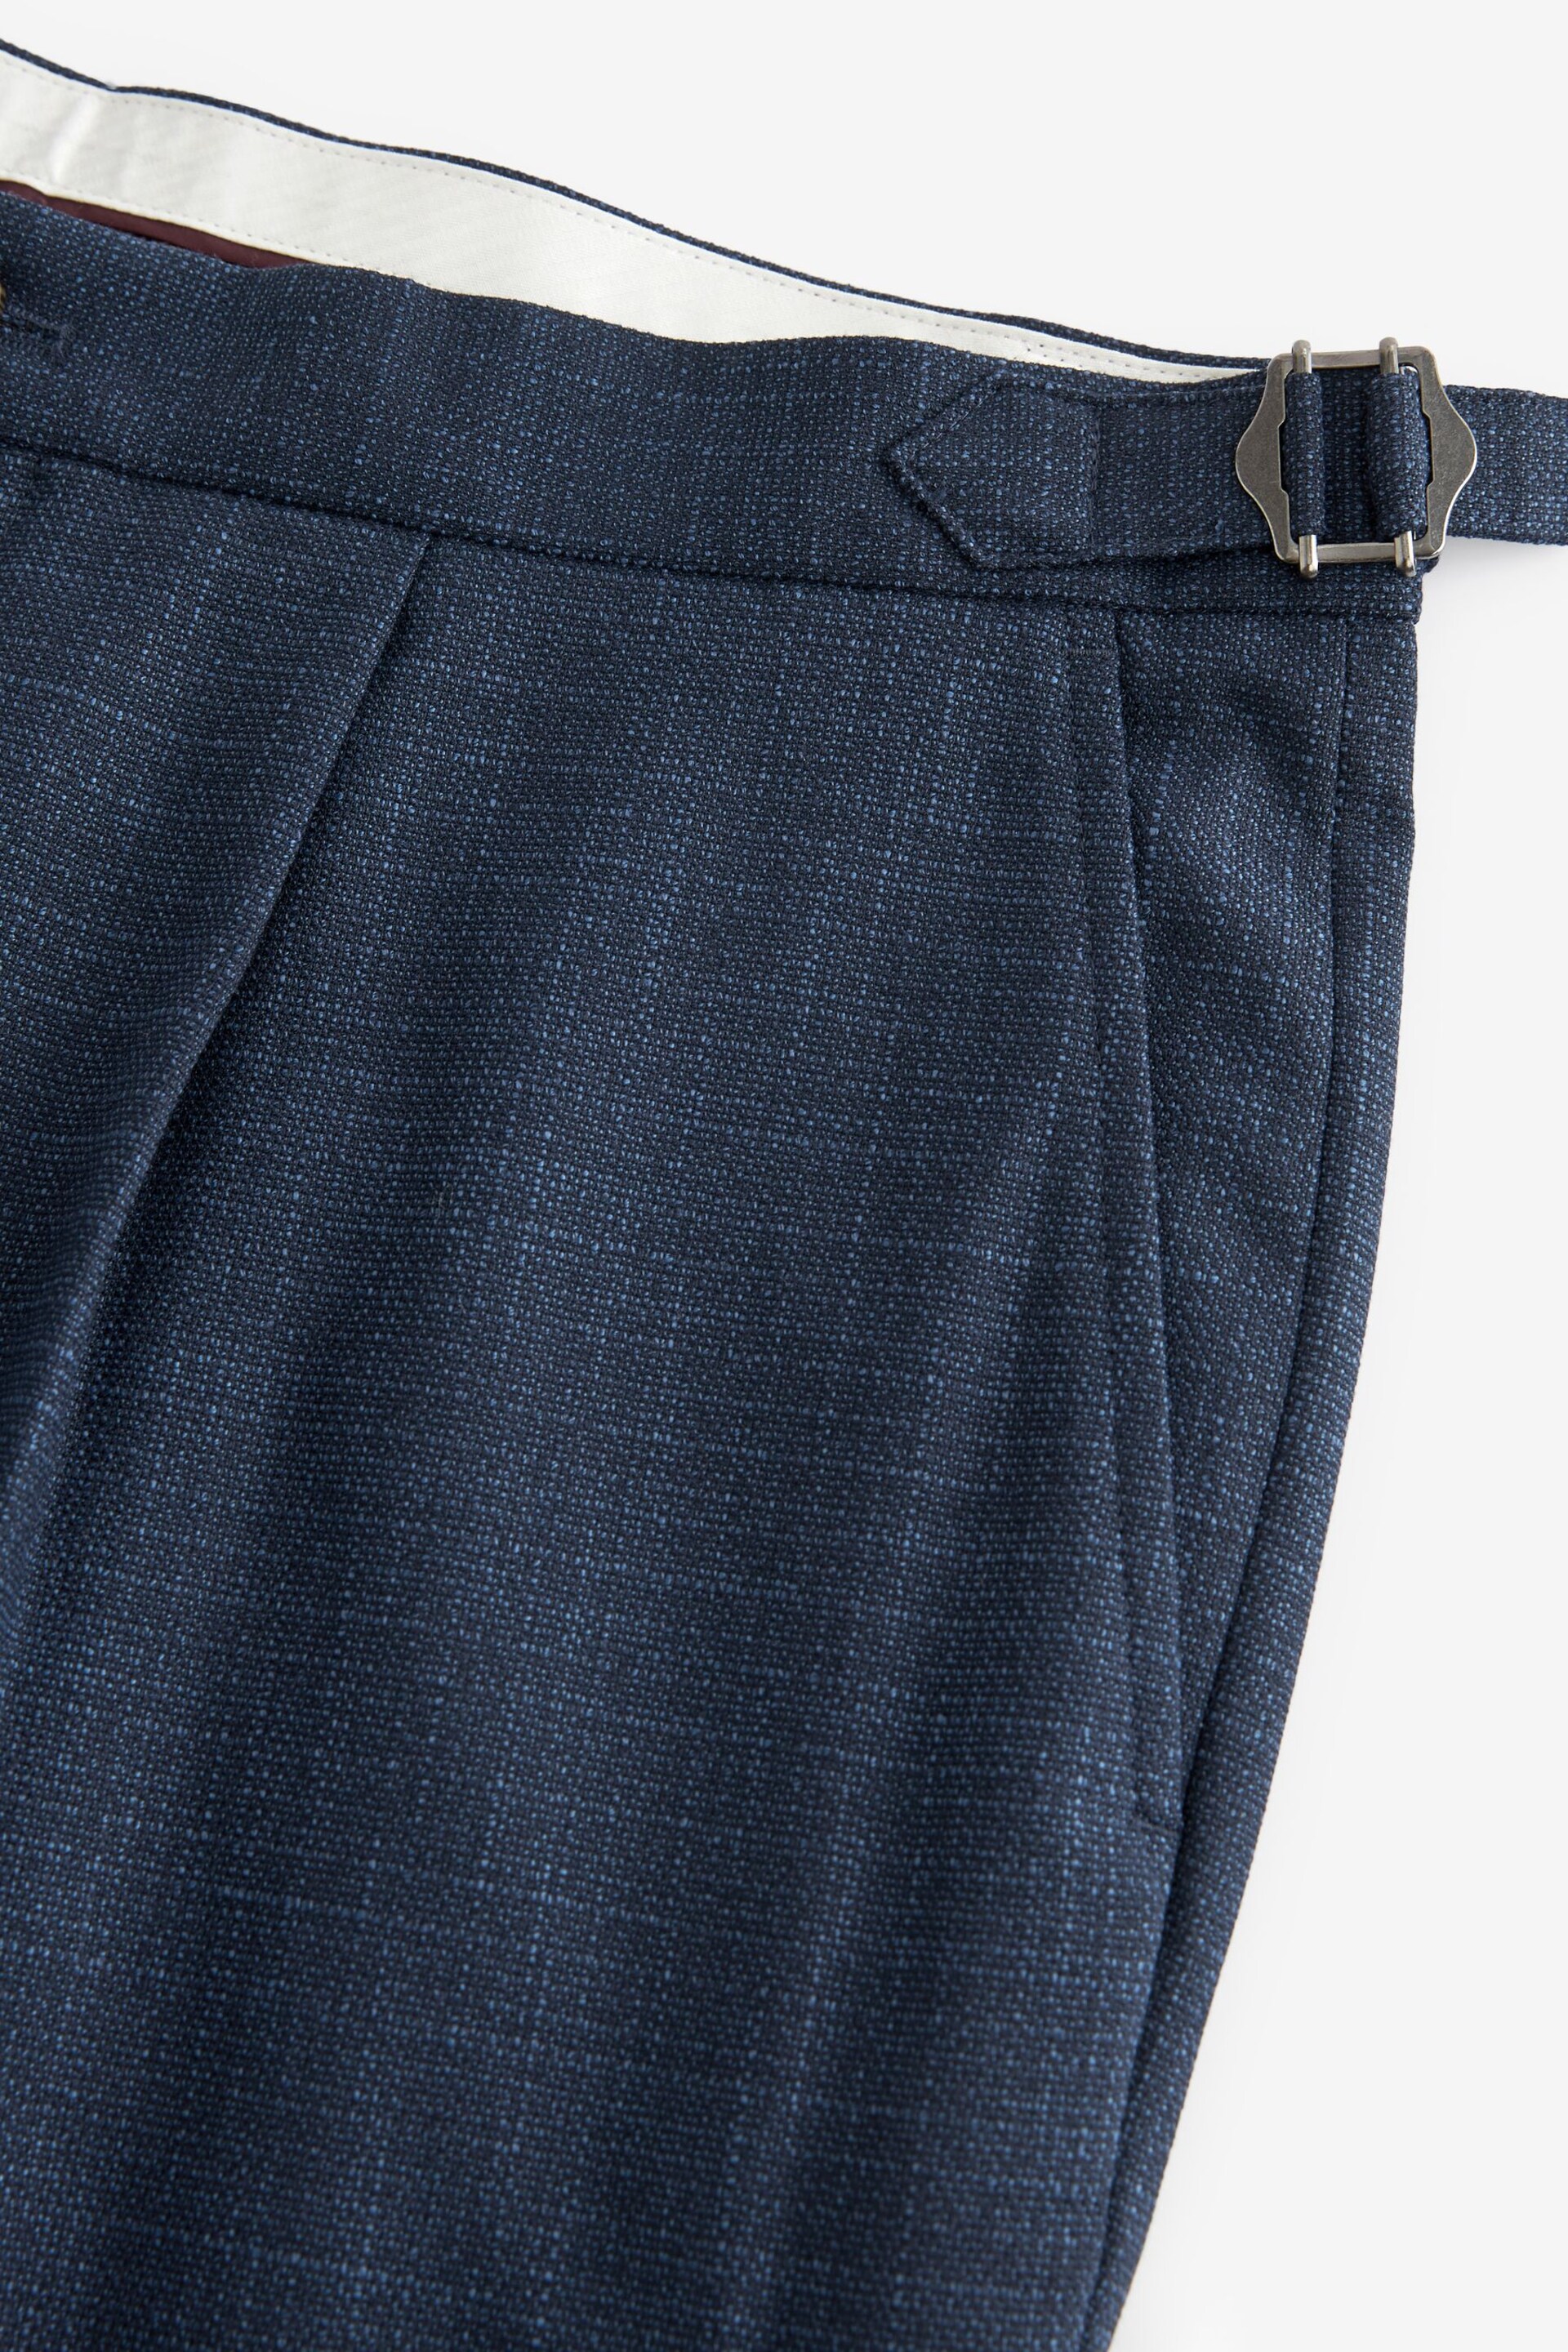 Navy Textured Side Adjuster Trousers - Image 8 of 10